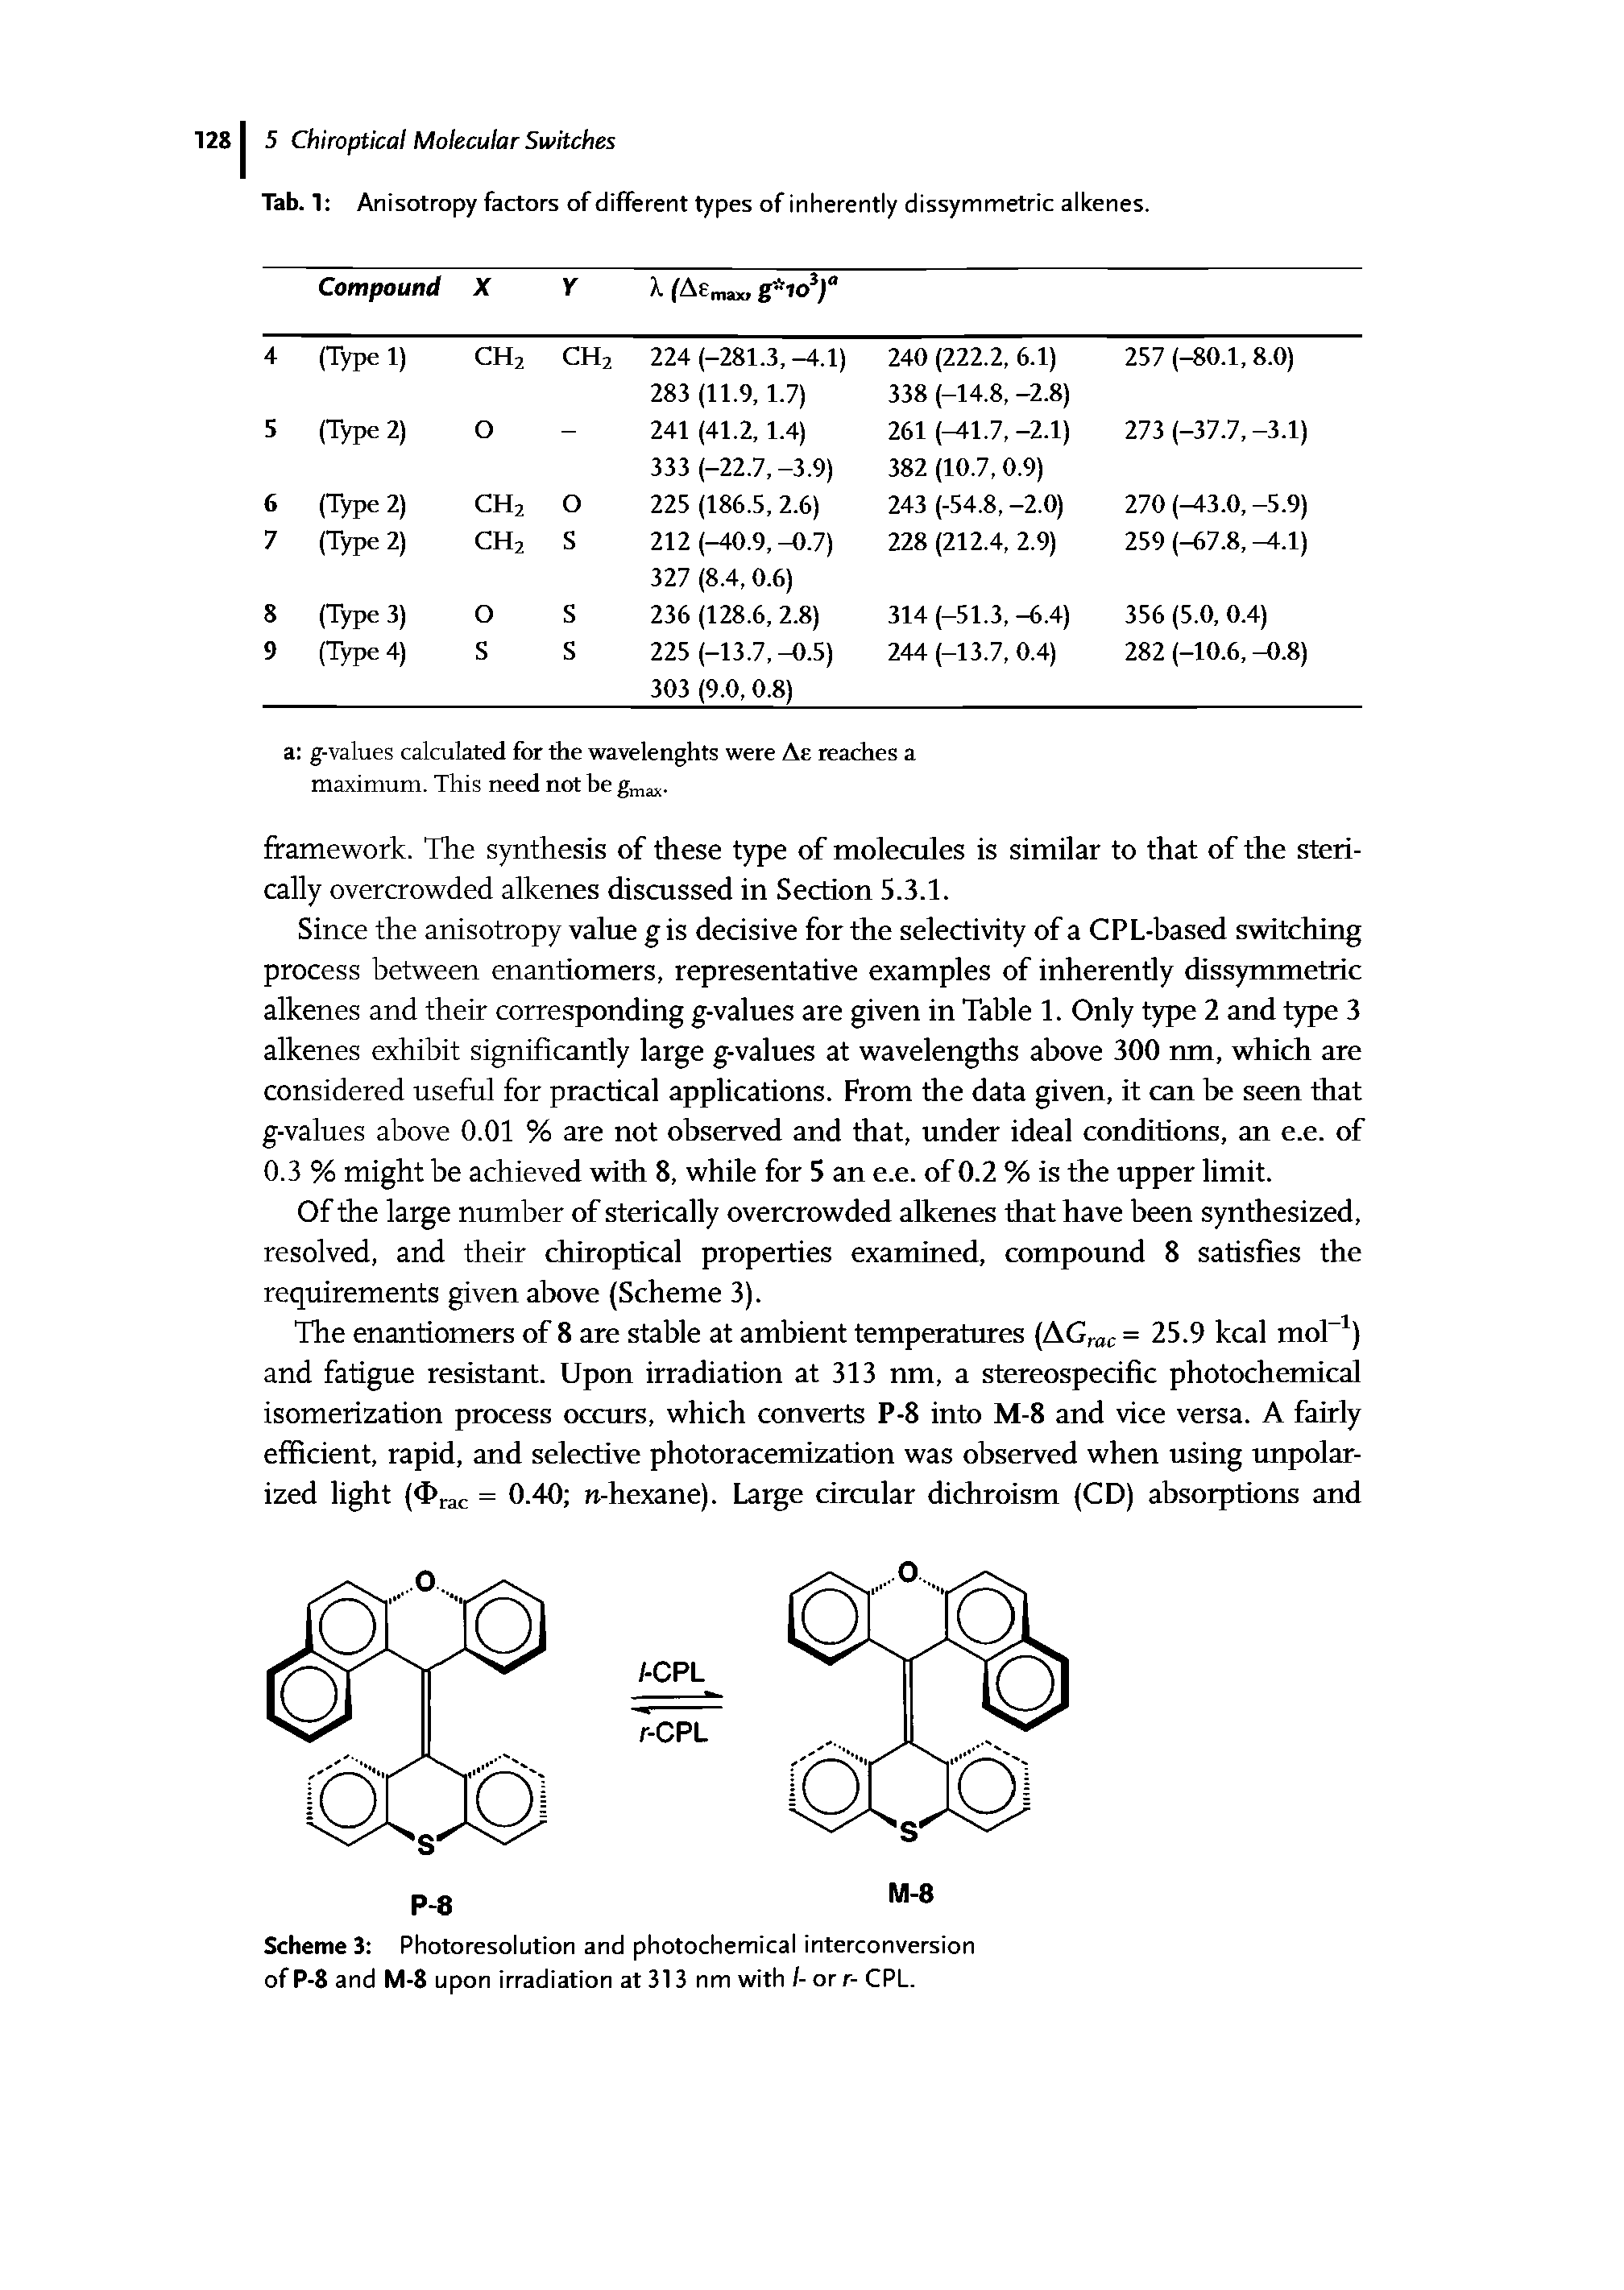 Tab. 1 Anisotropy factors of different types of inherently dissymmetric alkenes.